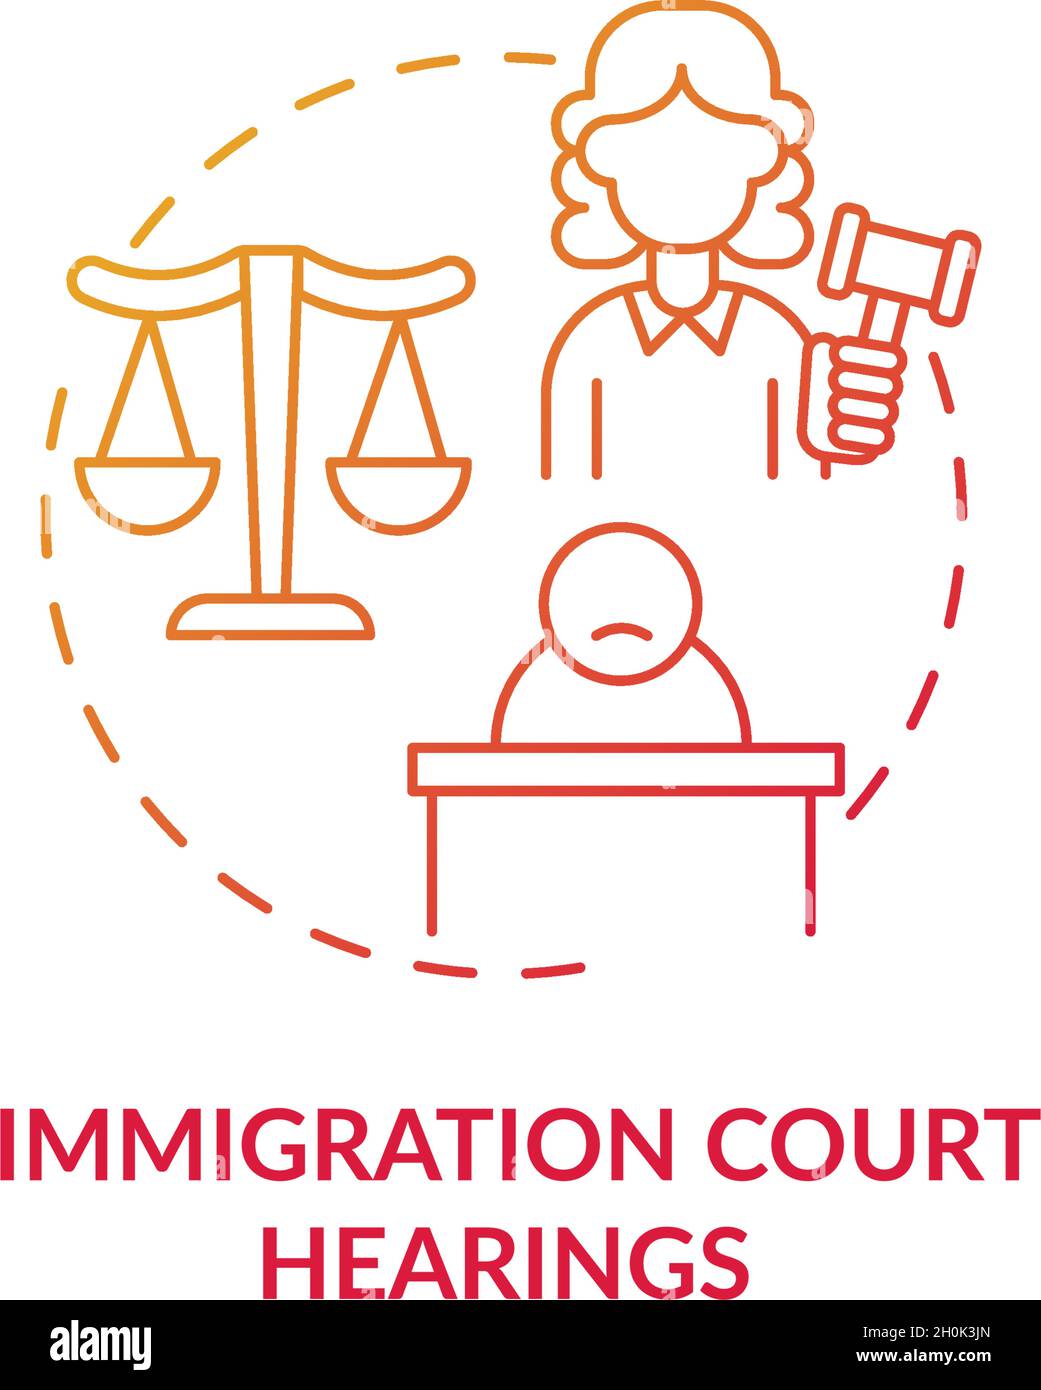 Immigration court hearings gradient red concept icon Stock Vector Image